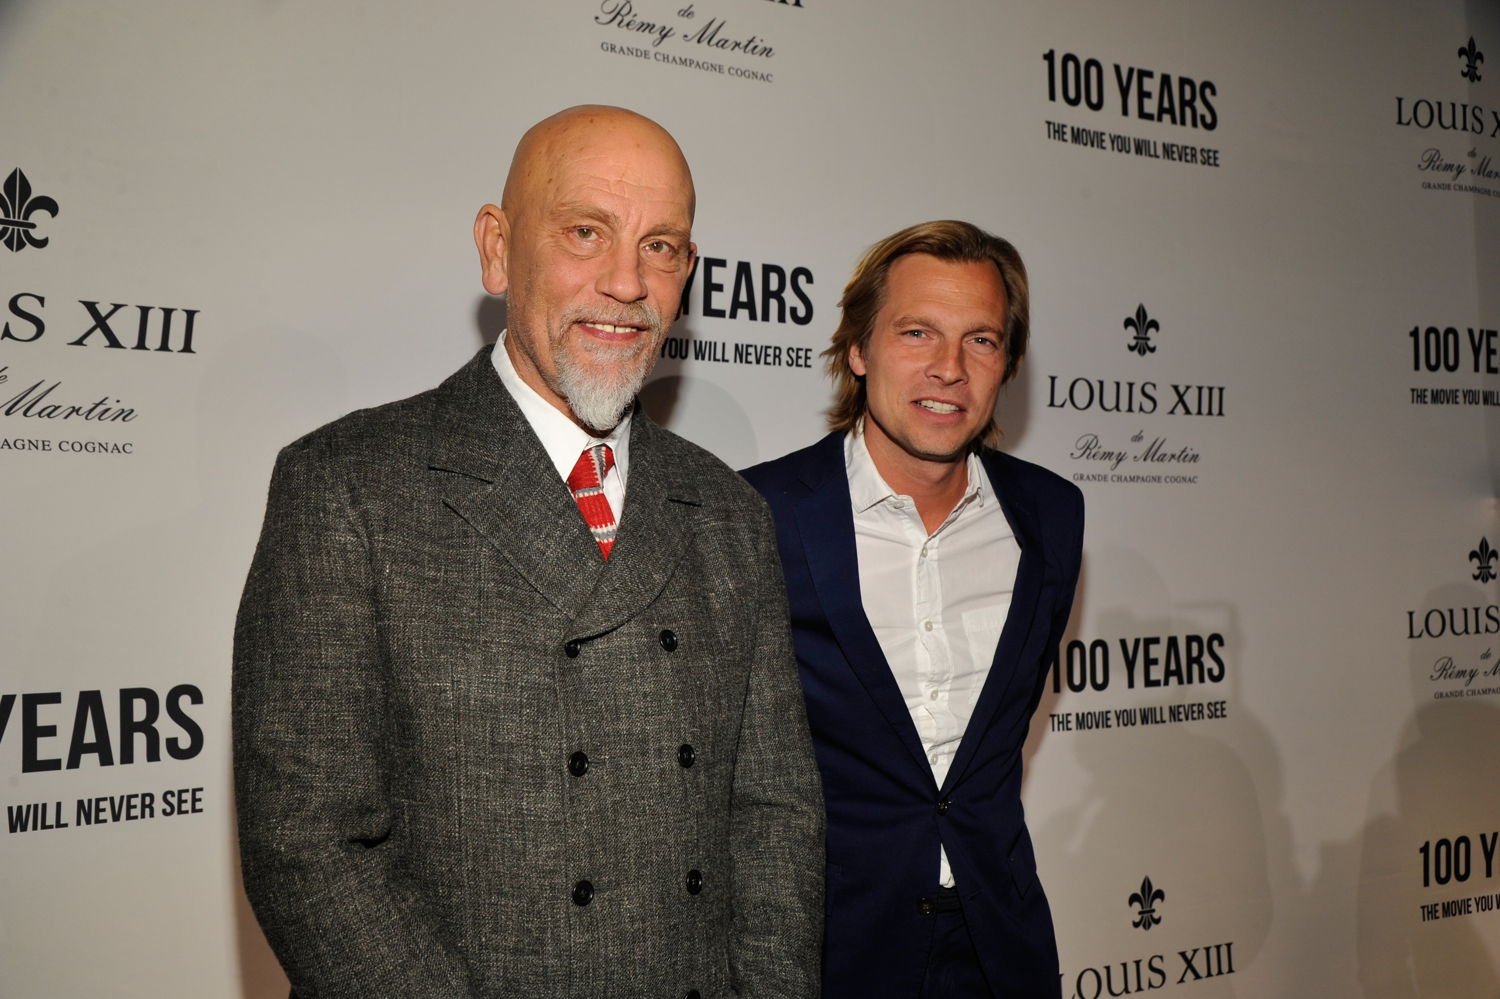 John Malkovich and LOUIS XIII CEO Ludovic Du Plessis